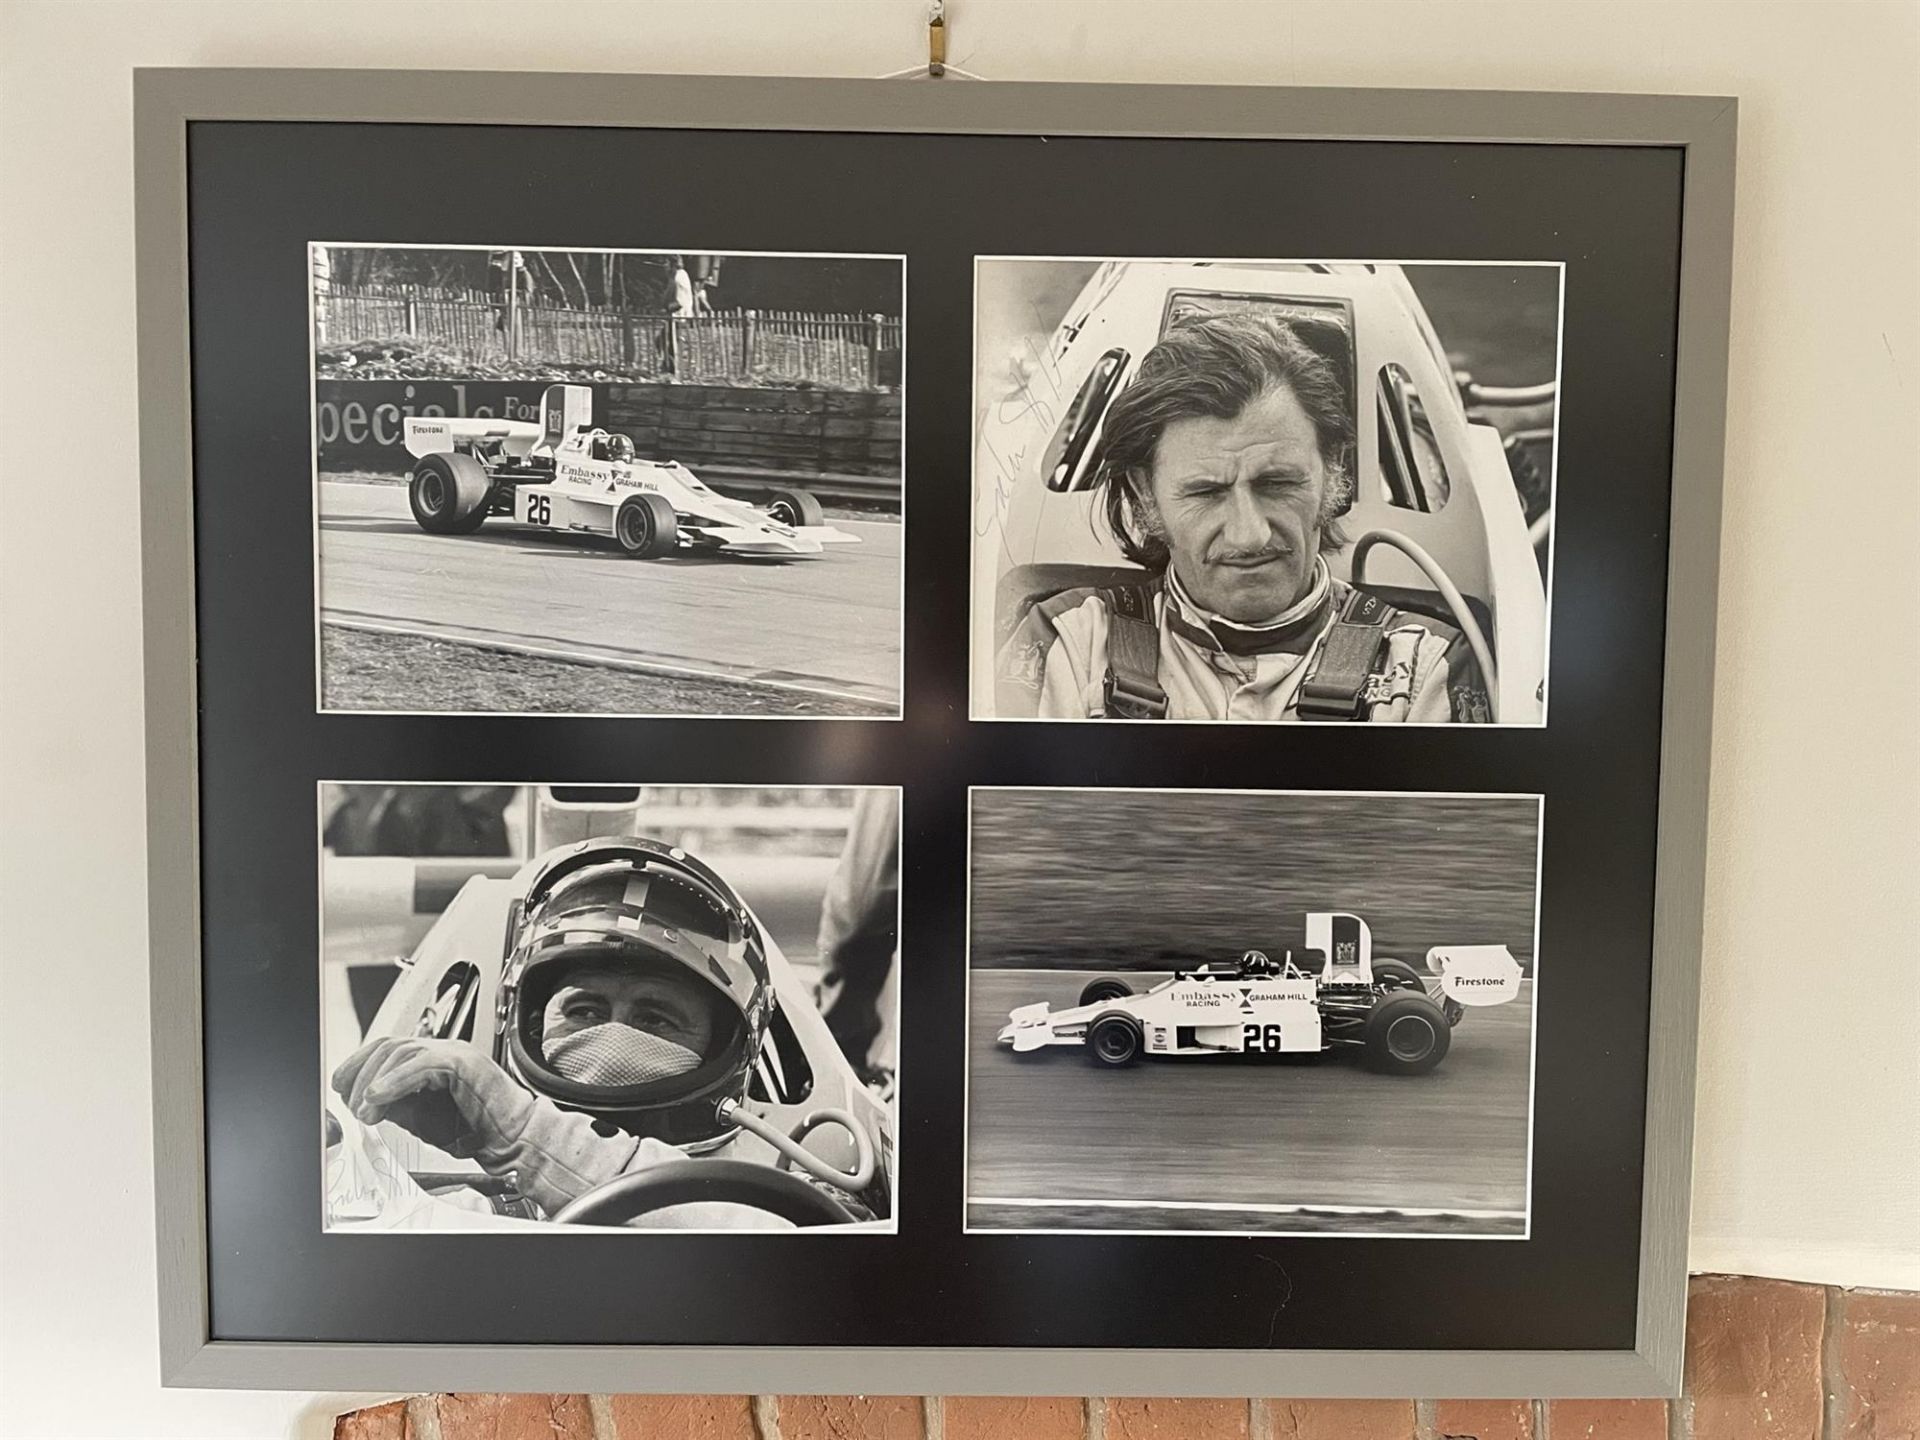 Four Original Photographic Prints of Graham Hill from the 1974 British Grand Prix* - Image 10 of 10